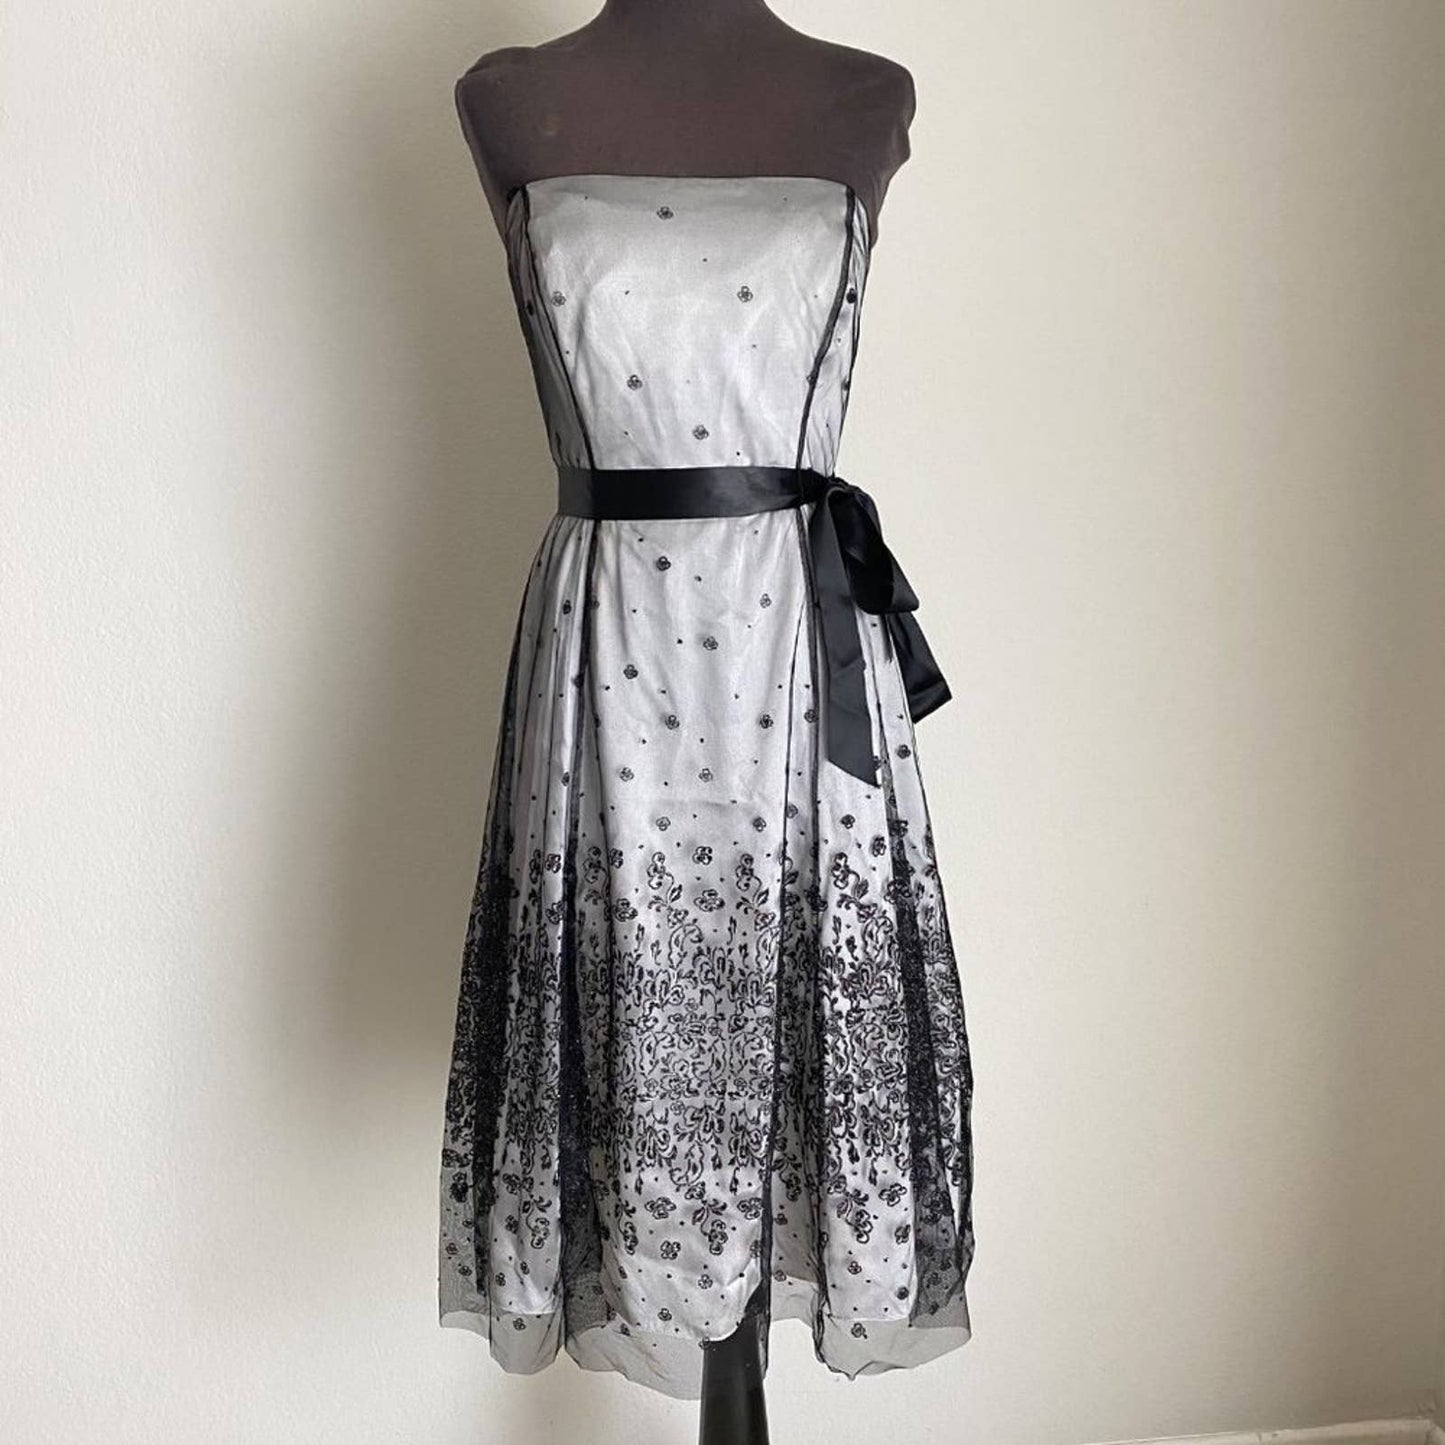 Adrianna Papell Boutique sz 8  1950s inspired A-line dress